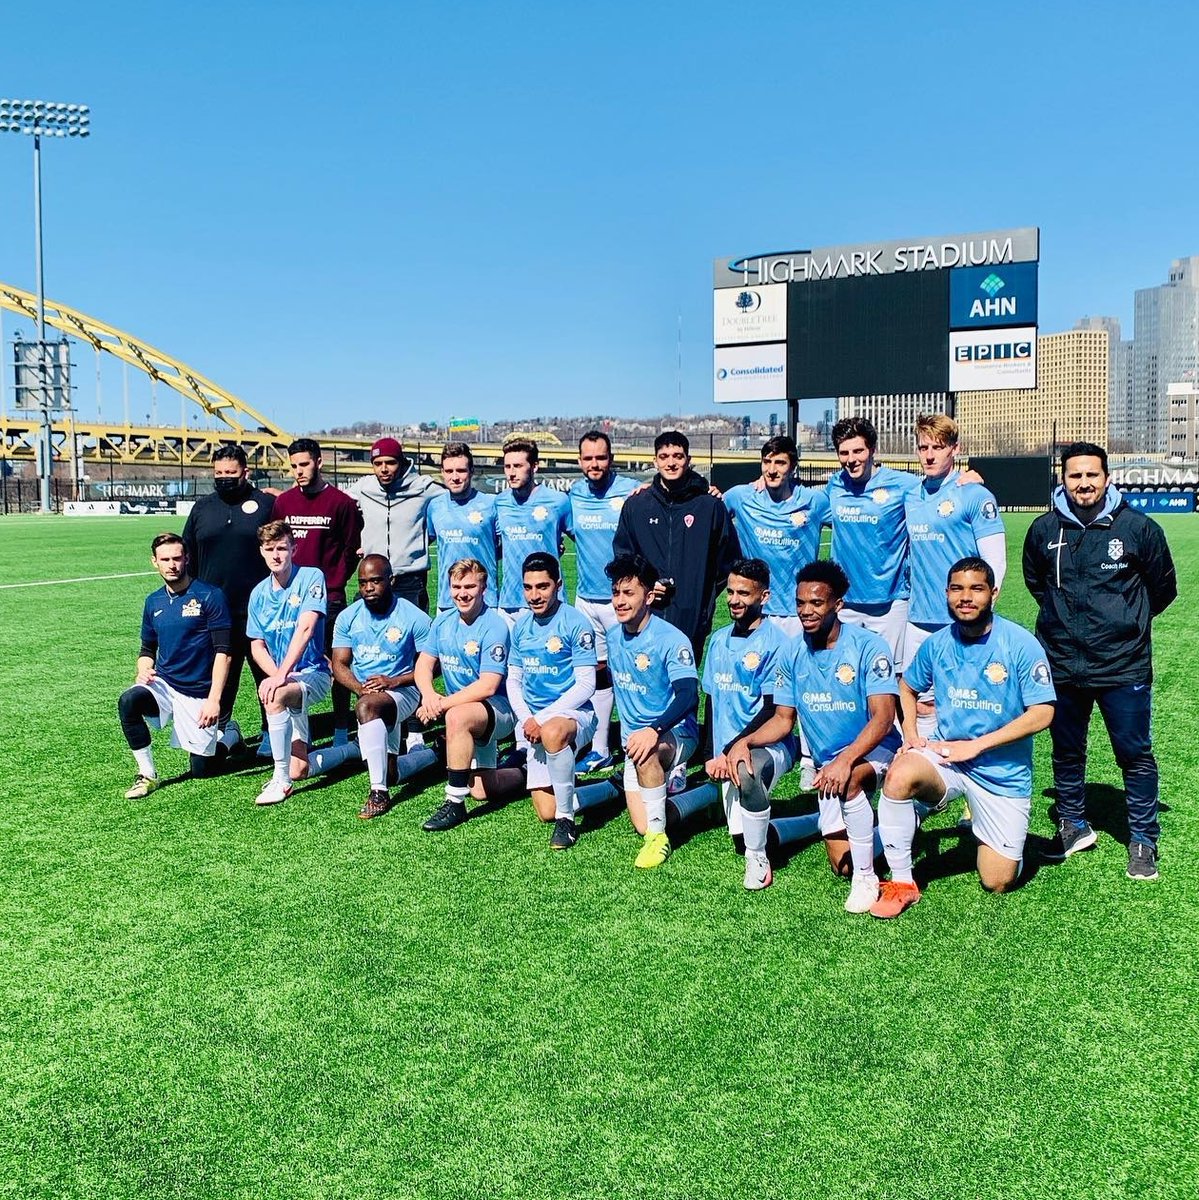 Our sponsored team, Appalachia Steel FC, kicks off the 2023 GPSL season this Sunday at Cupples Stadium in Pittsburgh!⚽️ Join us in supporting ASFC, which is made up of some of the best amateur talent in WV and Pittsburgh (including a few of our M&S’ers! )🙌 #AppalachiaSteelFC